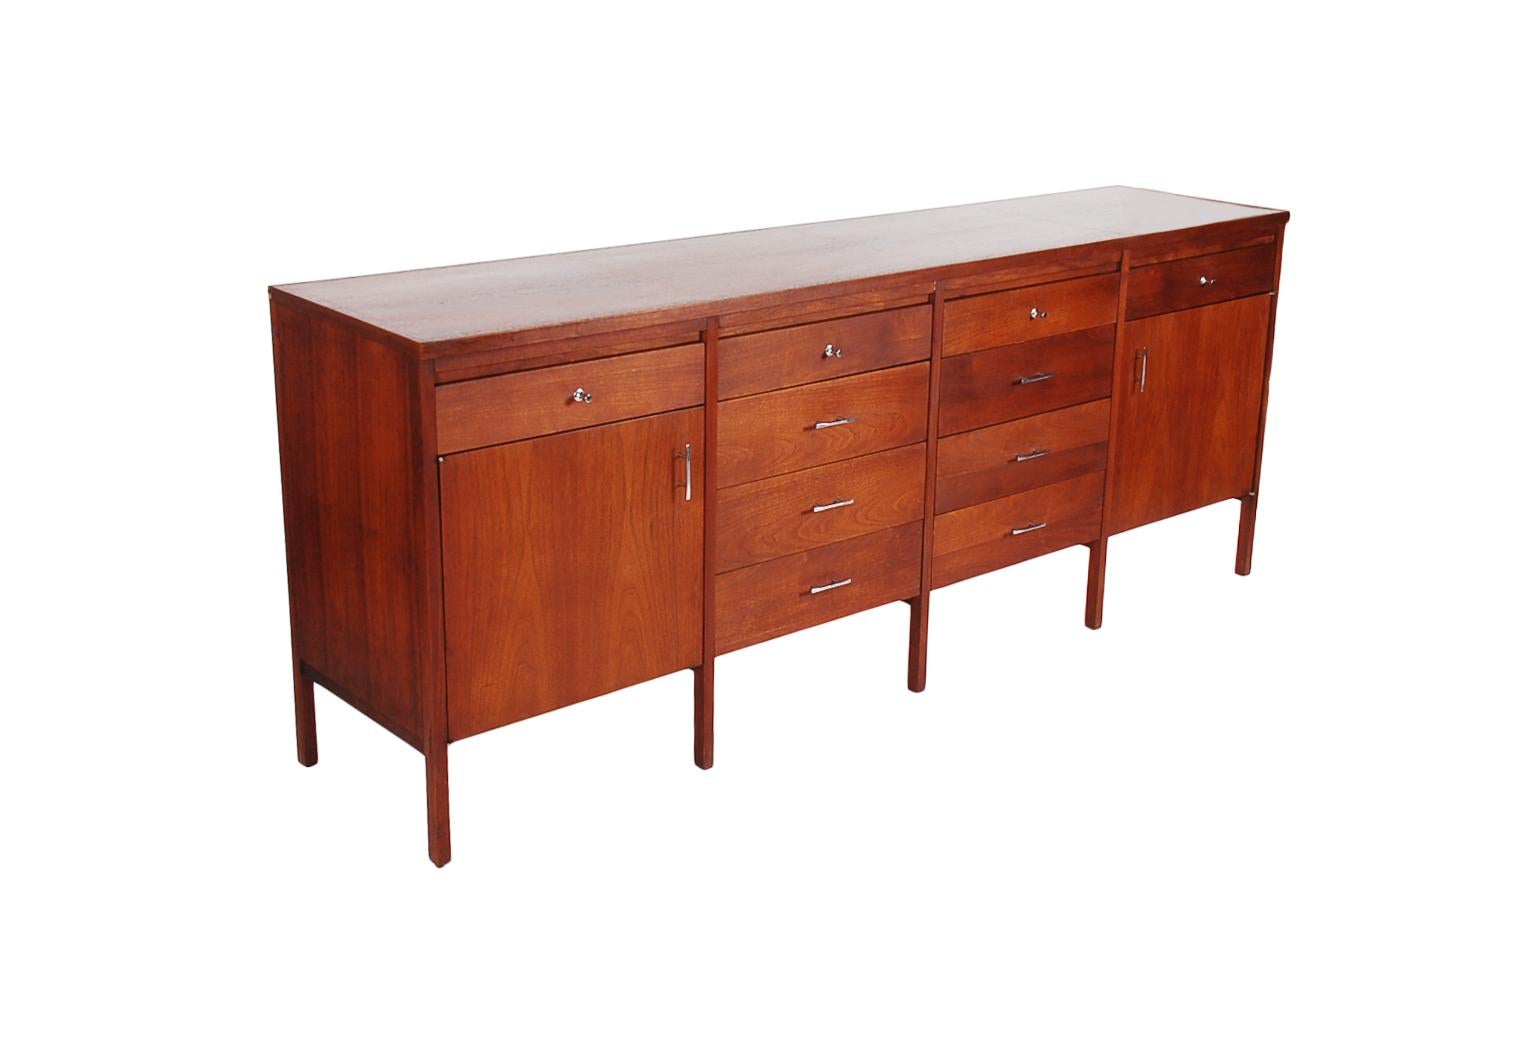 A chic and classic American modern credenza, circa 1960s. It features two finish woods, both walnut and rosewood. Stylish 8 leg design with tons of storage.